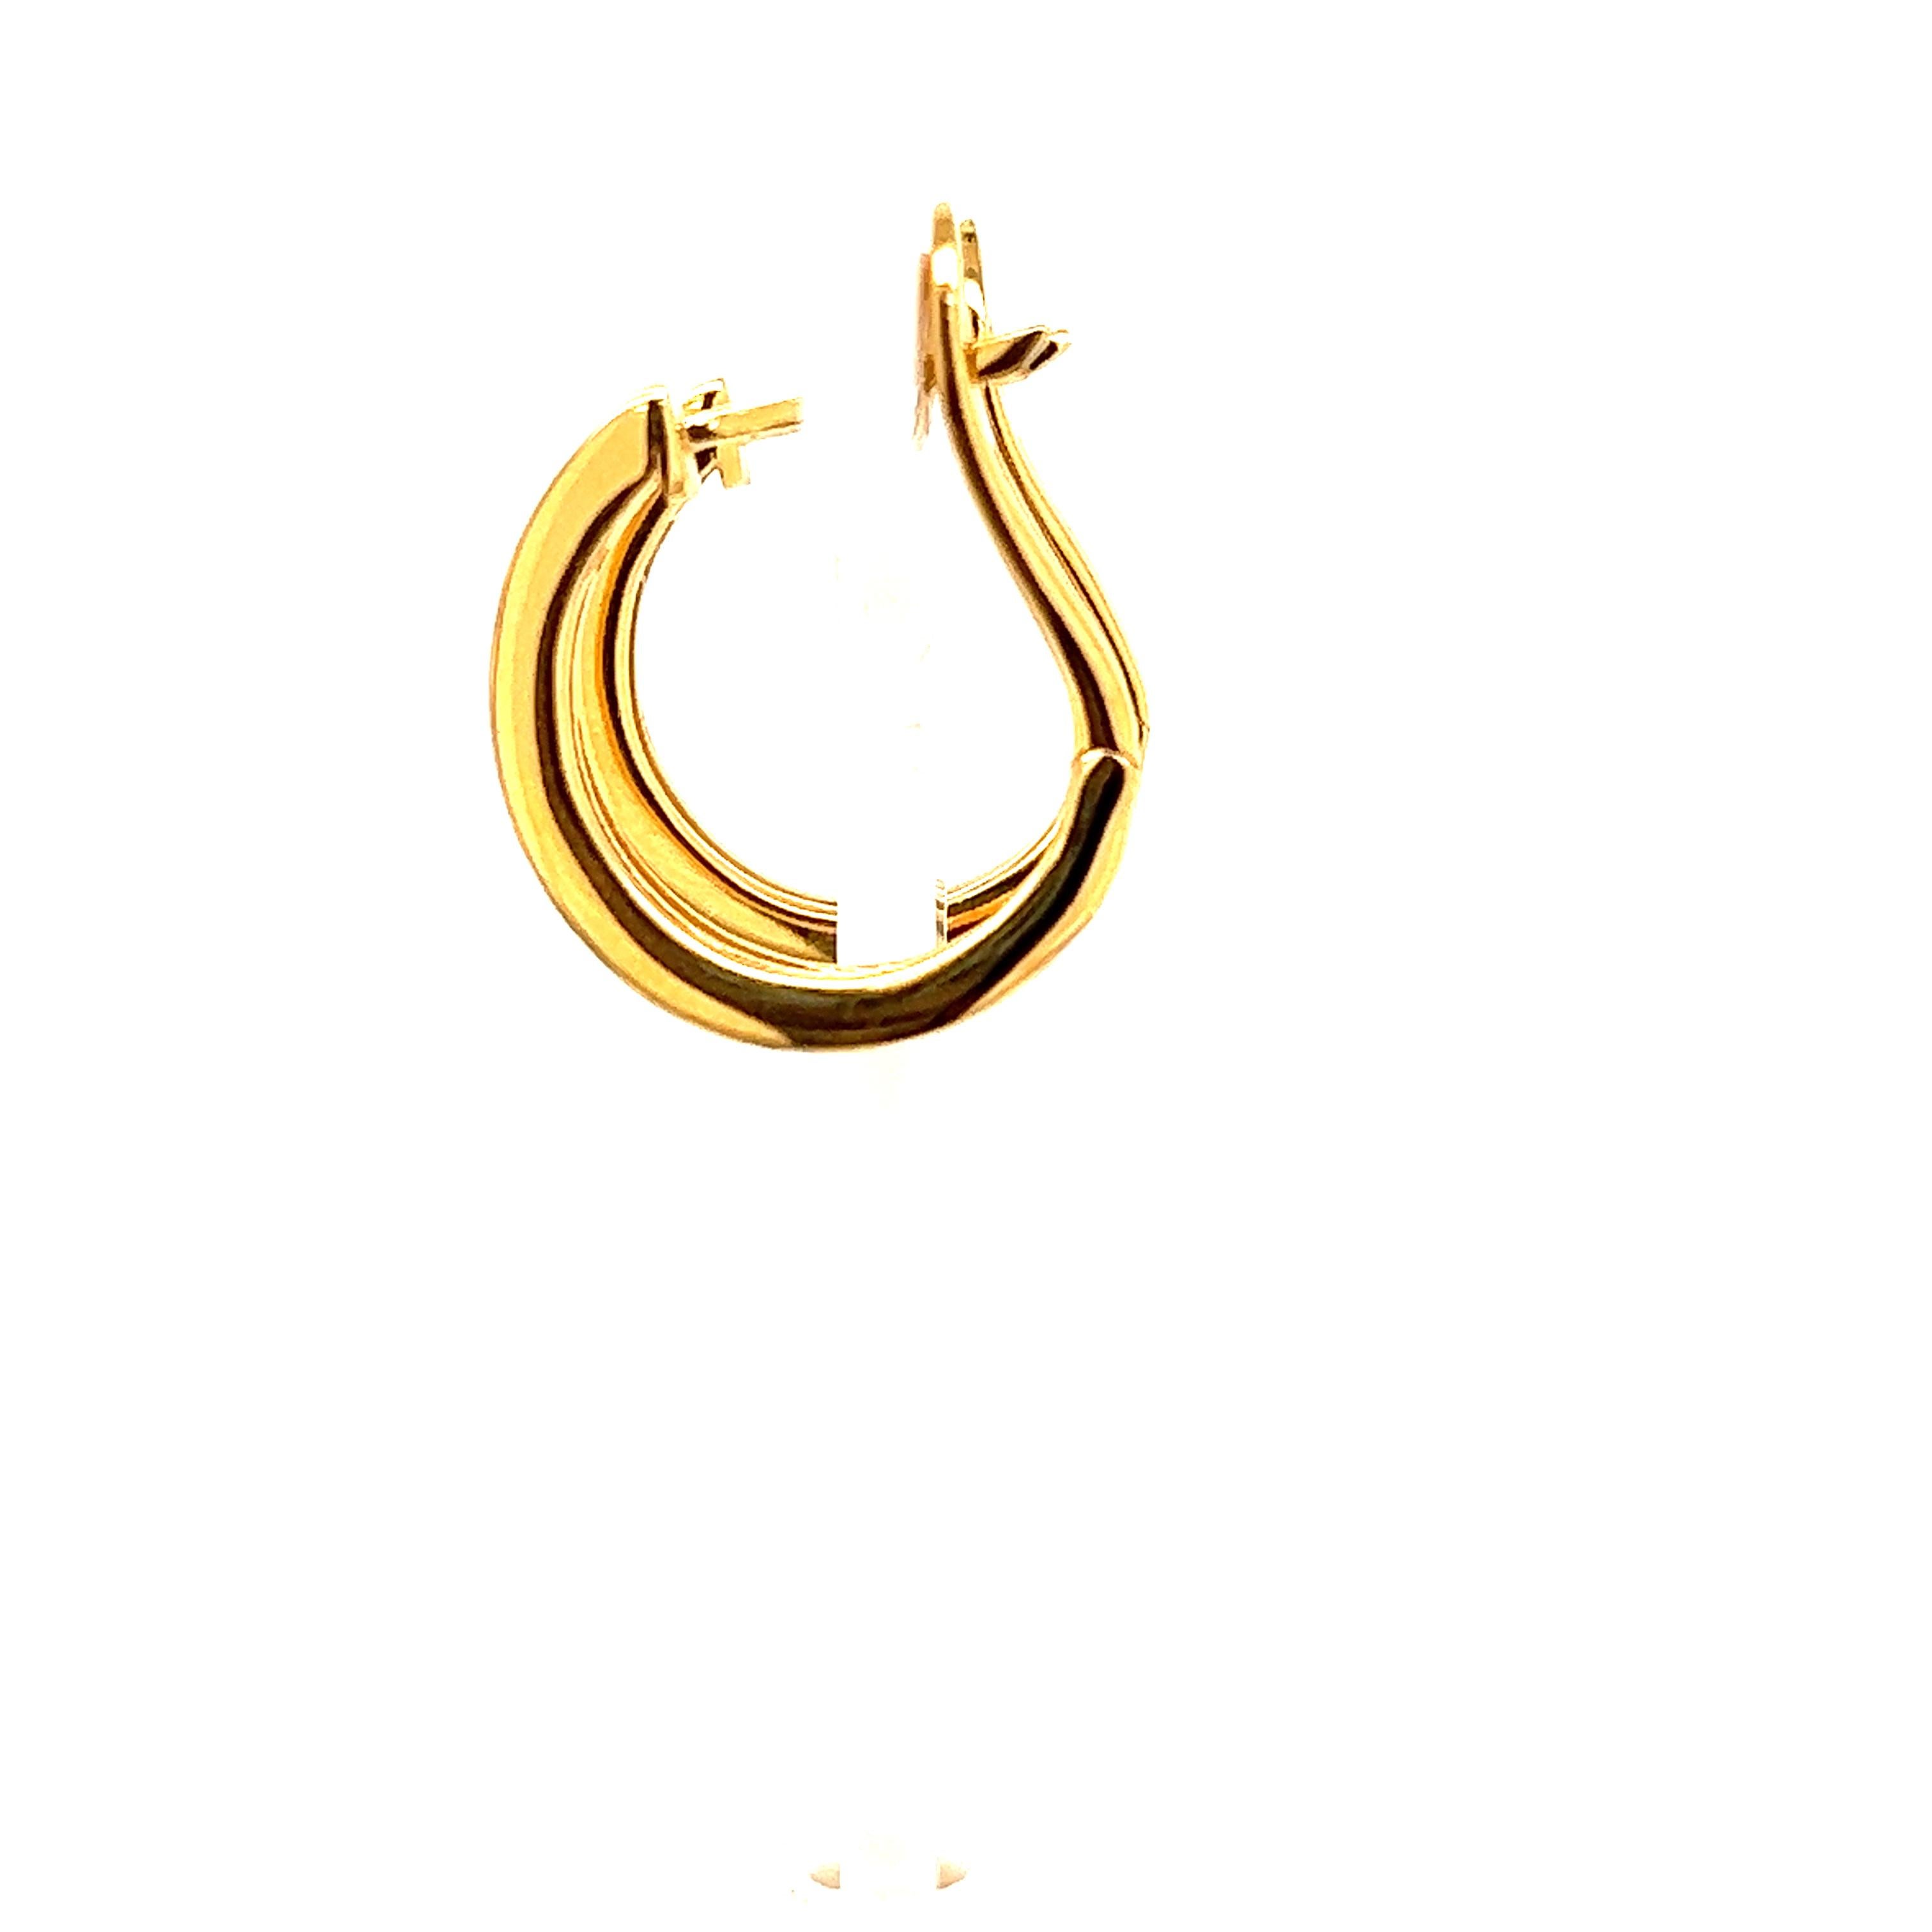 Round Cut Hand-Crafted 14K Yellow Gold Hammered Huggies Earrings For Sale